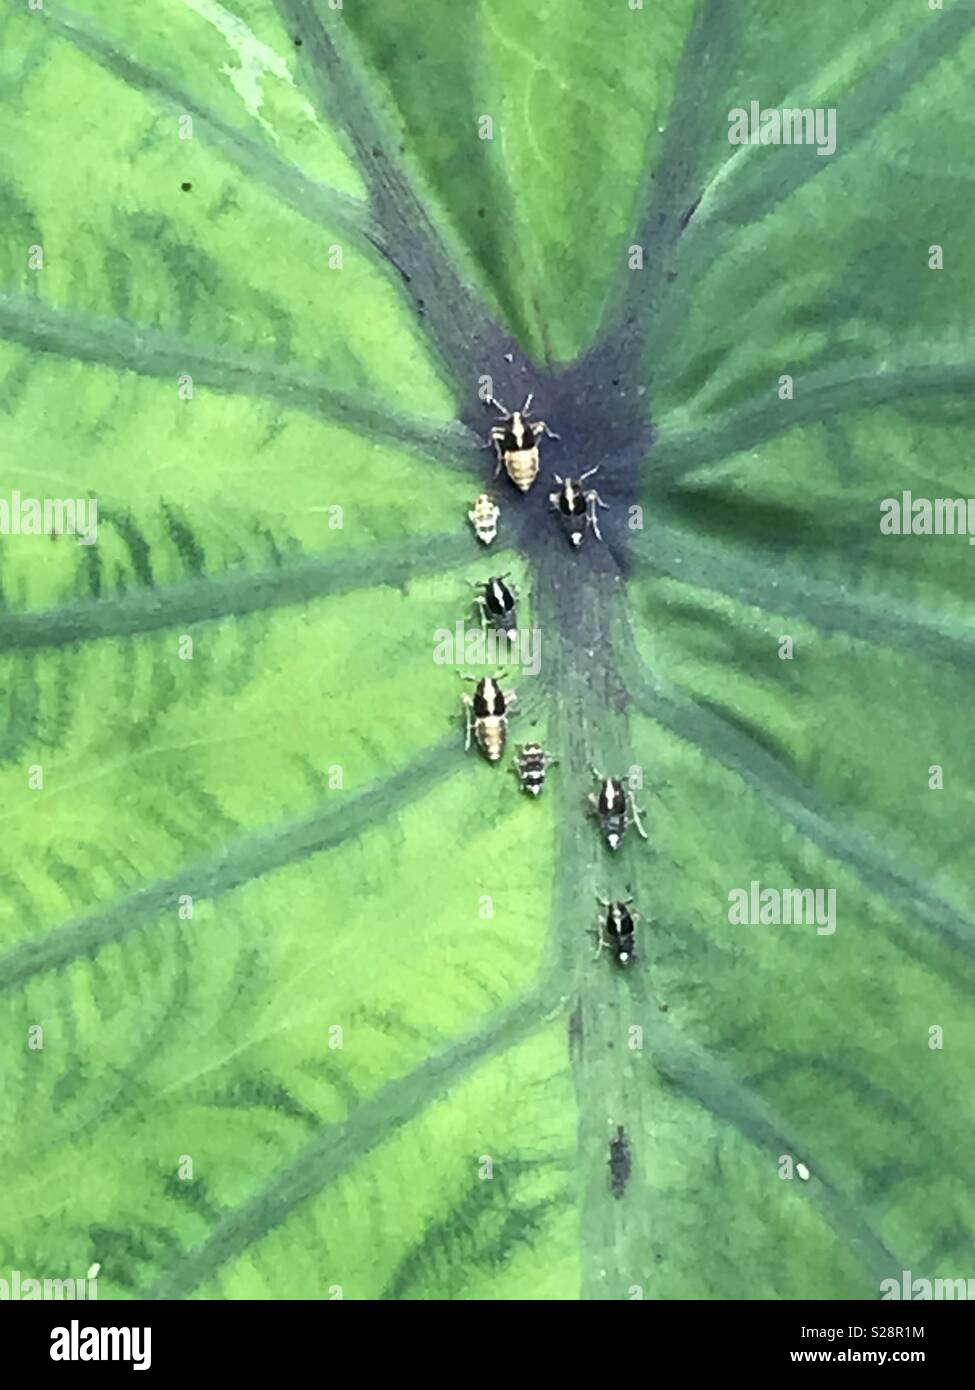 Insects on a leaf Stock Photo